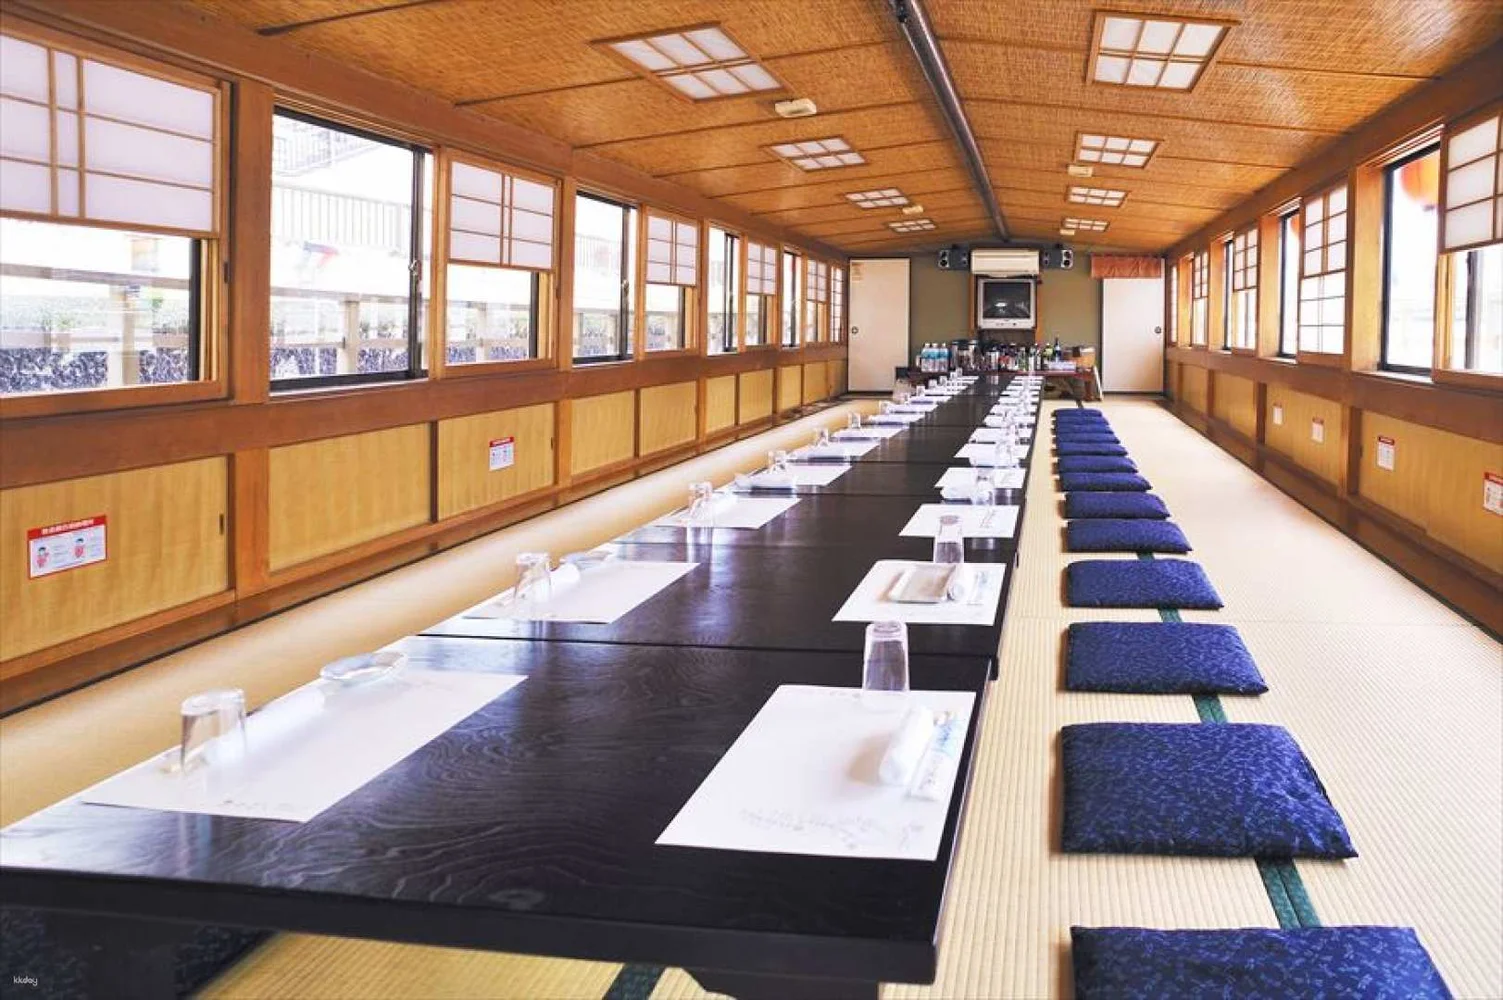 Sumida River Yakatabune Boat Cruise with Lunch or Dinner E-Tickets